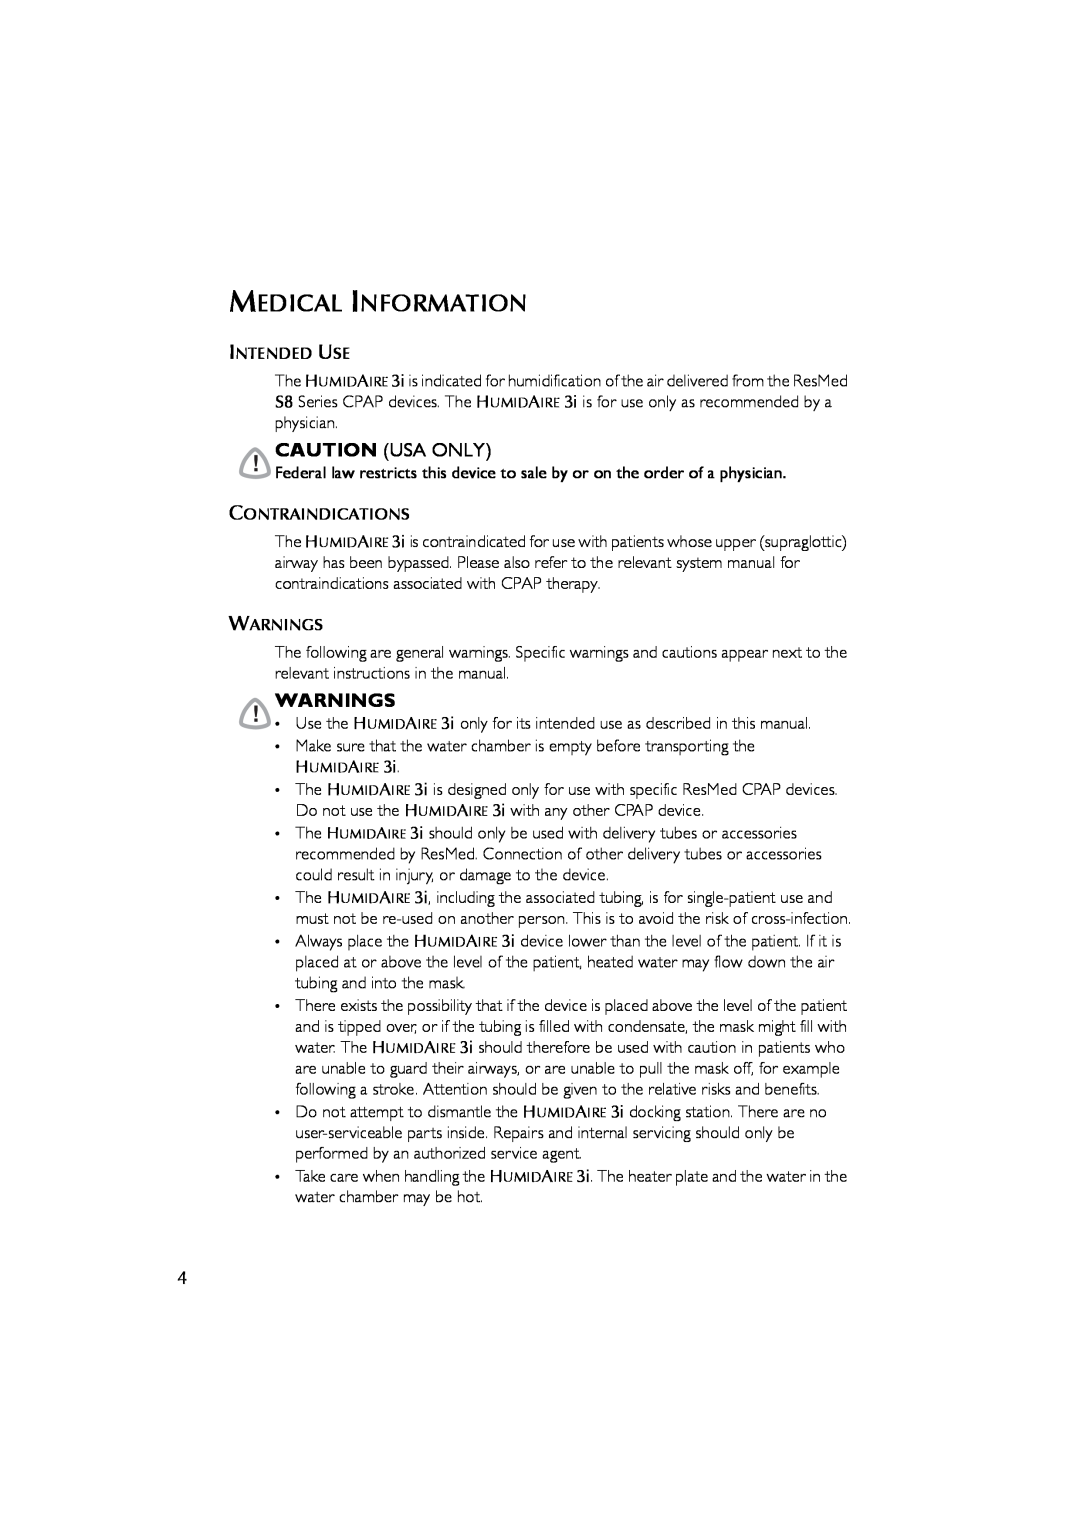 ResMed 3I user manual Medical Information, Caution Usa Only, Warnings 